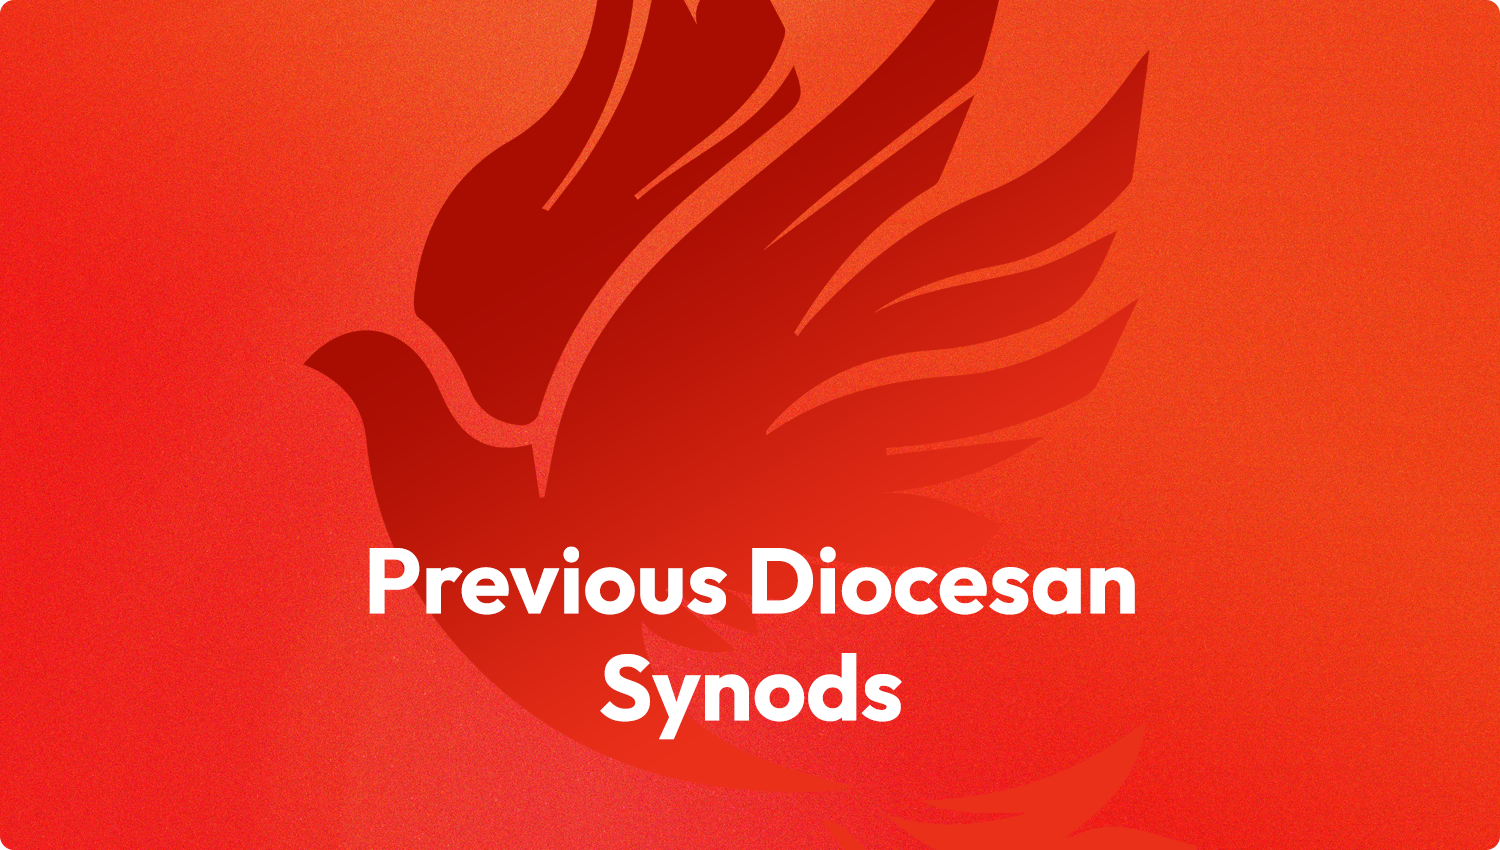 Click here to view the previous Diocesan Synods